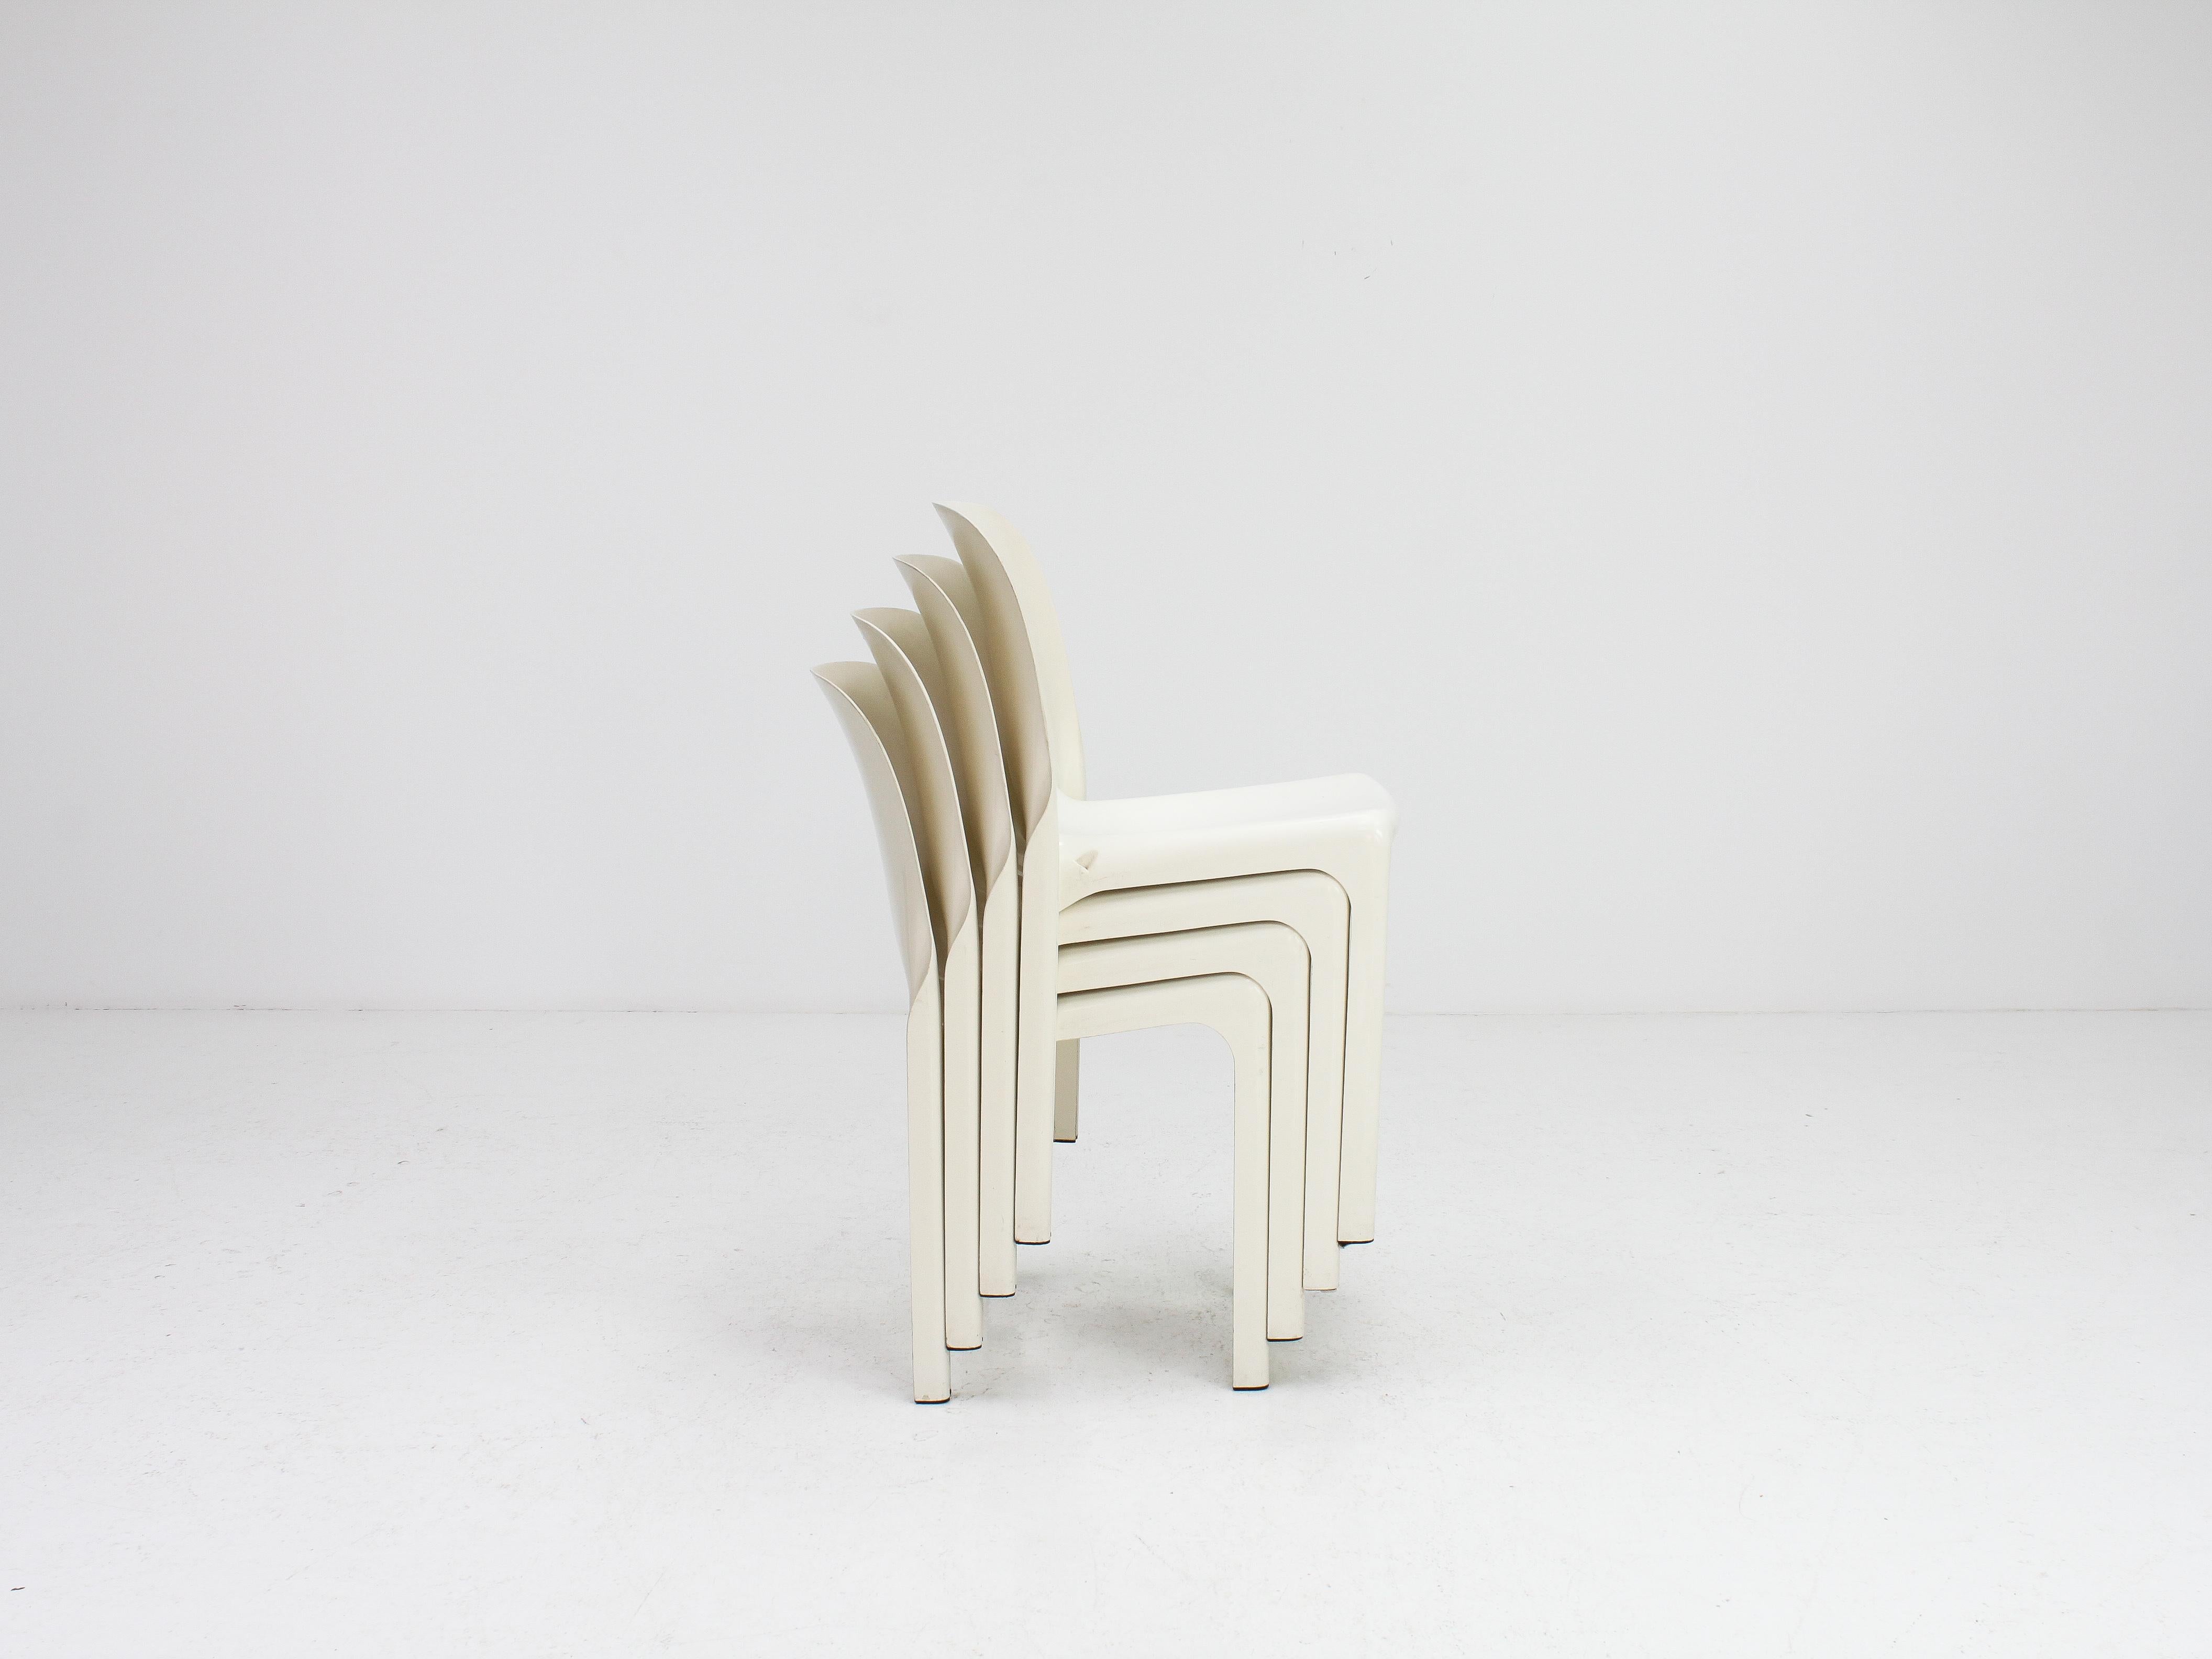 Plastic 'Selene' Stacking Chairs in White by Vico Magistretti for Artemide, 1969